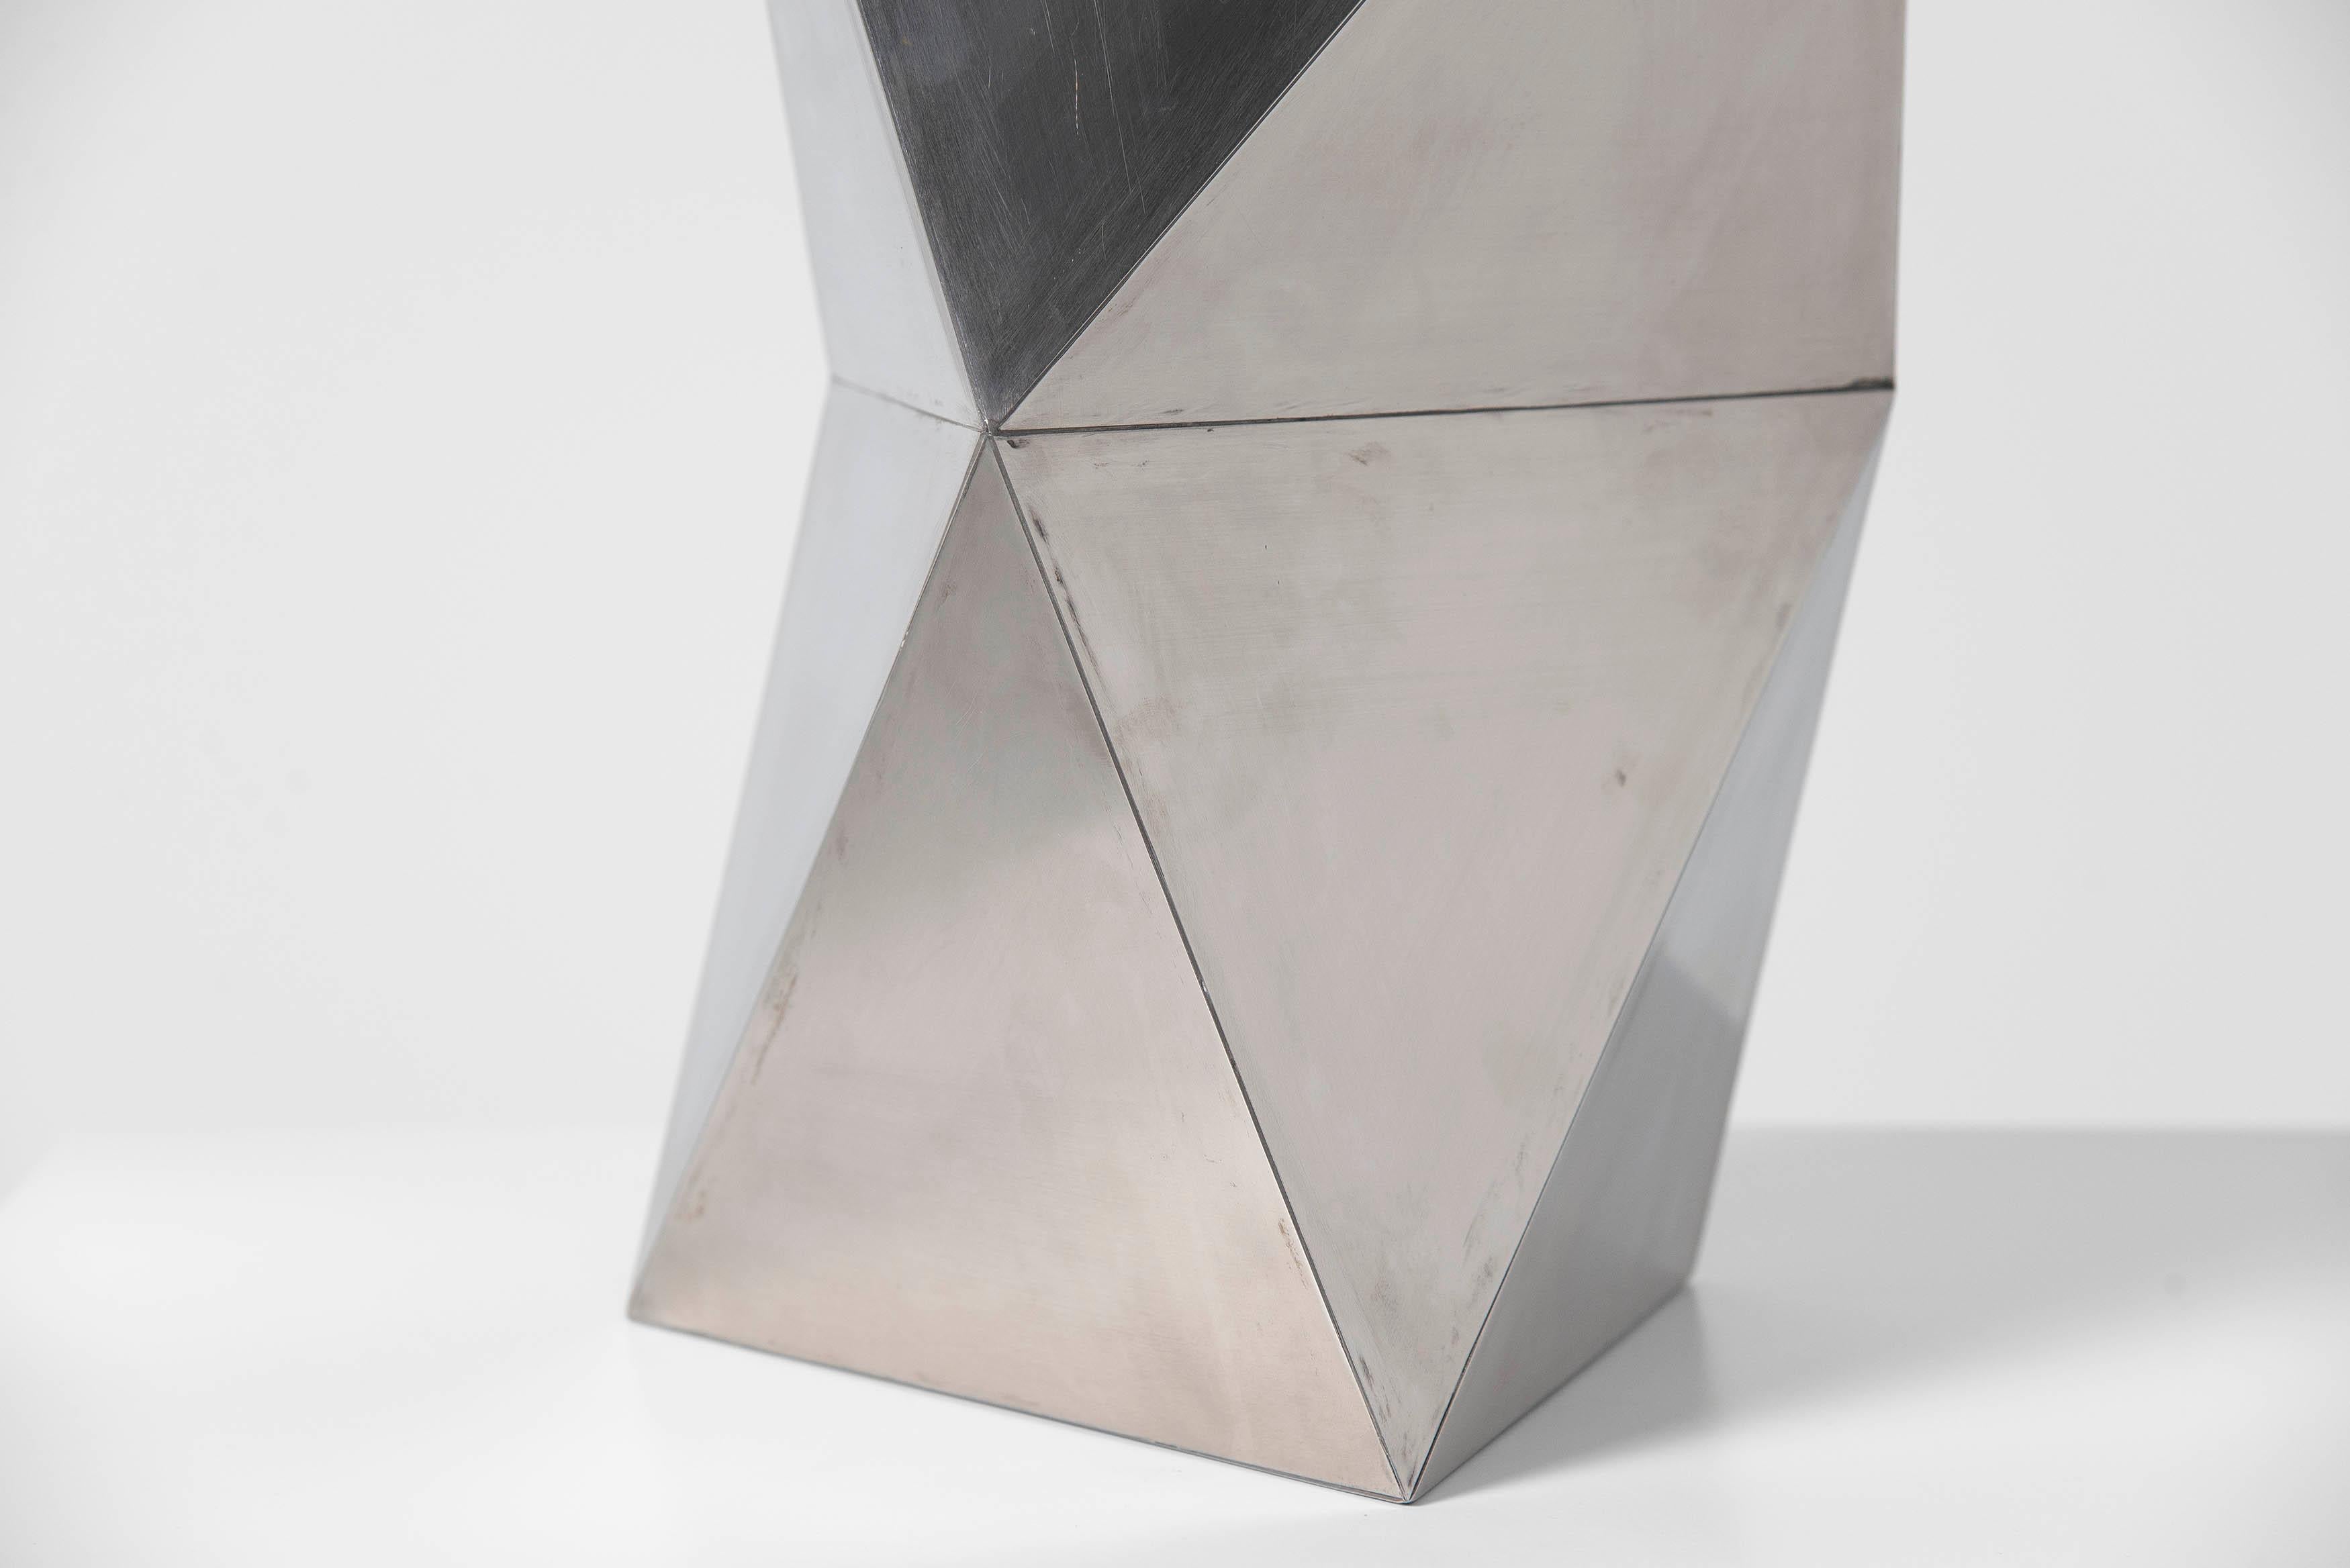 Very nice abstract stainless steel geometric sculpture designed by Rudolf Wolf and manufactured in his own atelier in 1981. This sculpture is one of several we acquired from the former bookkeeper from Rudolf Wold who bought these artworks in the